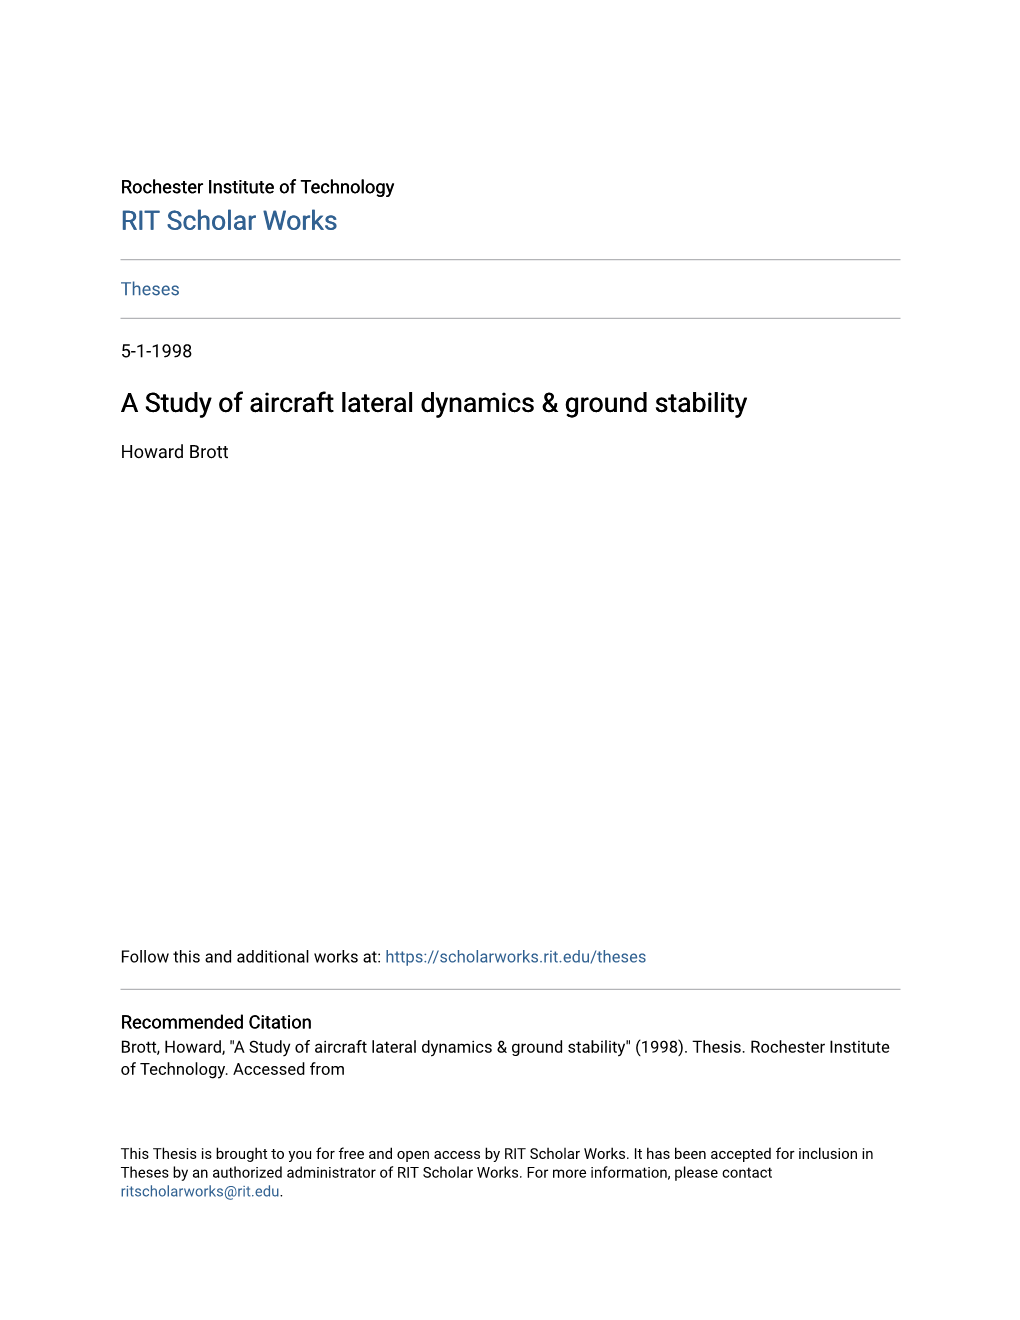 A Study of Aircraft Lateral Dynamics & Ground Stability